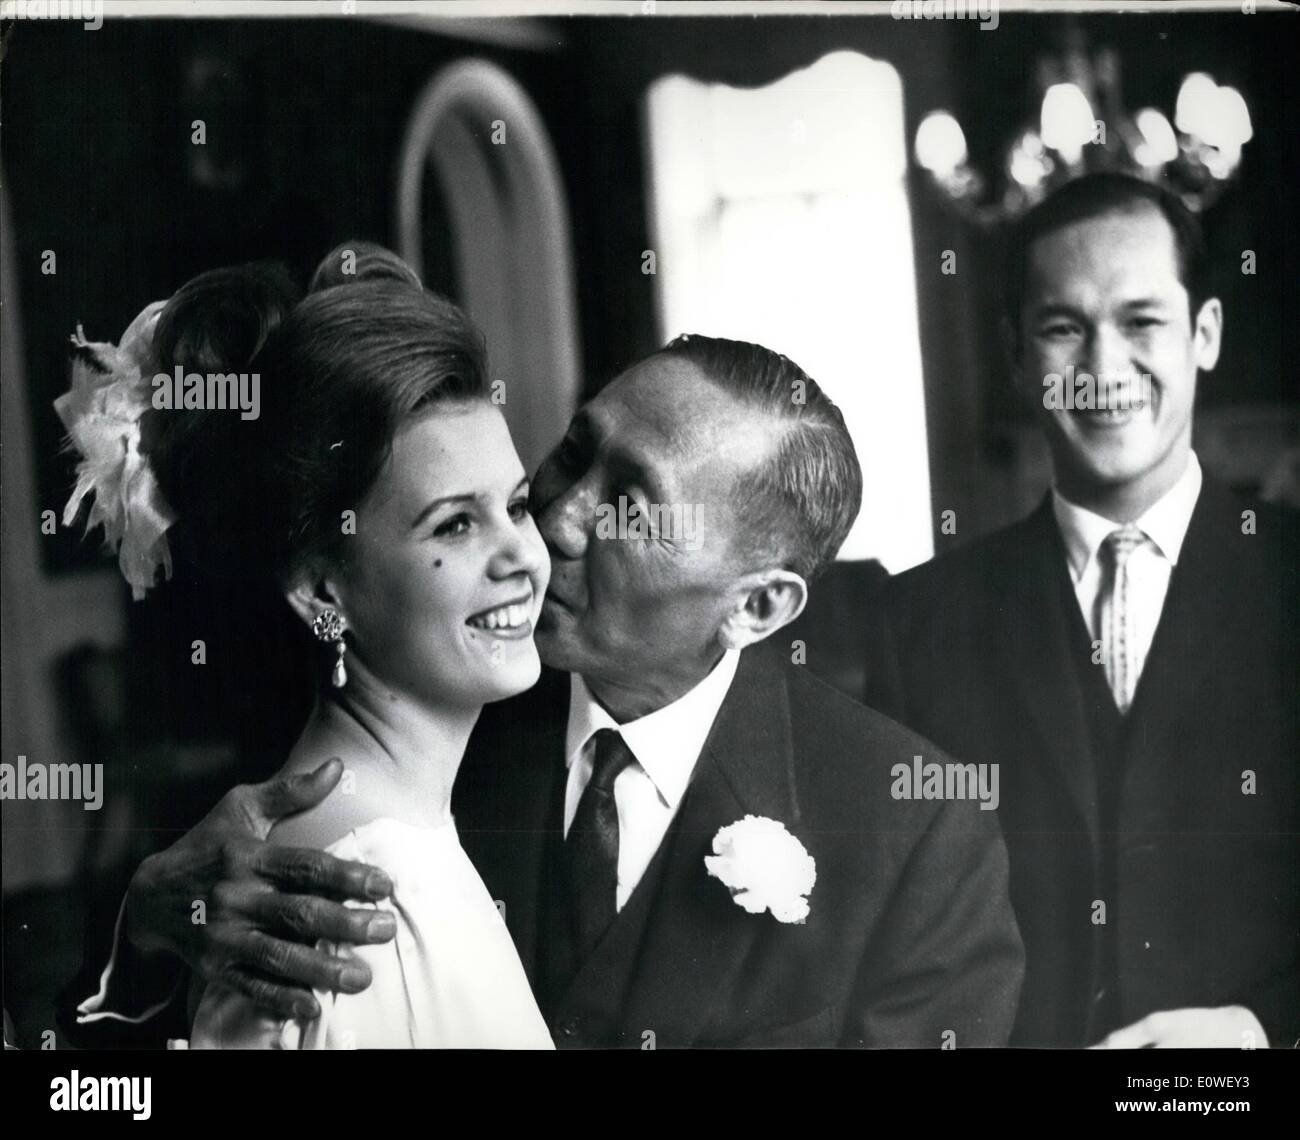 Oct. 10, 1962 - German Girl Weds Thai Diplomat Son: Karin Stahn, A 21-year-old German girl, was married in the Thai Embassy in London yesterday to 26-year-old Piya Malakul, second son of the Thai Ambassador, Mom Luang Peekdhip Malakul. Karin, who comes from Frank Frost West Germany, works in the foreign section of the West ,minster Bank in Threadneedle Street, London. Phot Shows The Thai ambassador has a kiss for the bride. Bridegroom Piya is ion the right. Stock Photo